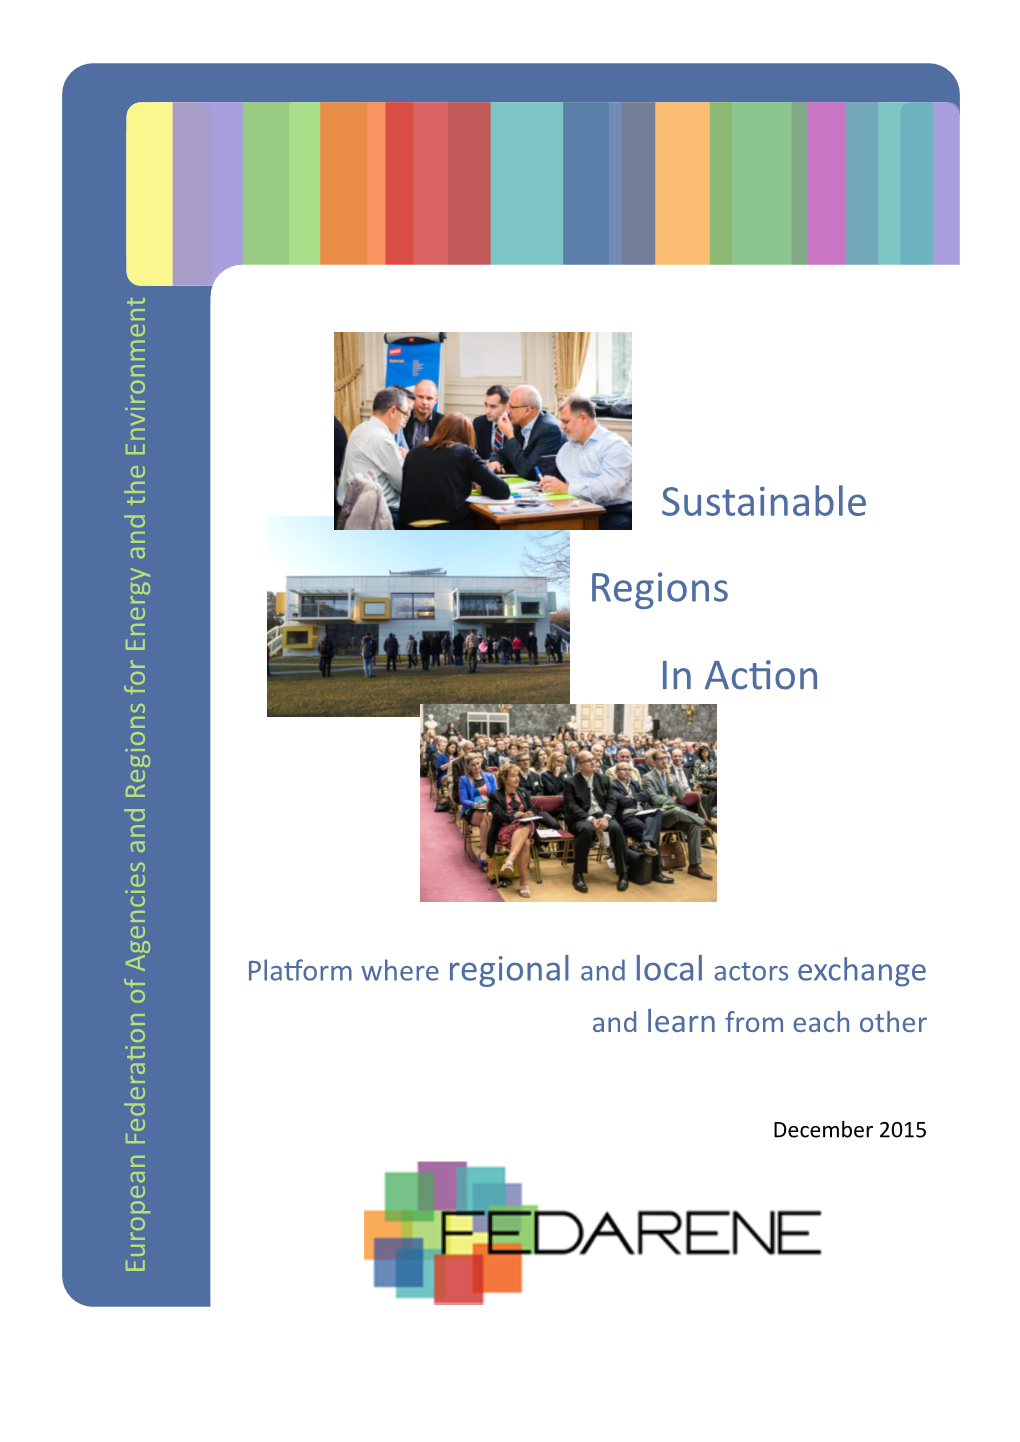 Sustainable Regions in Action